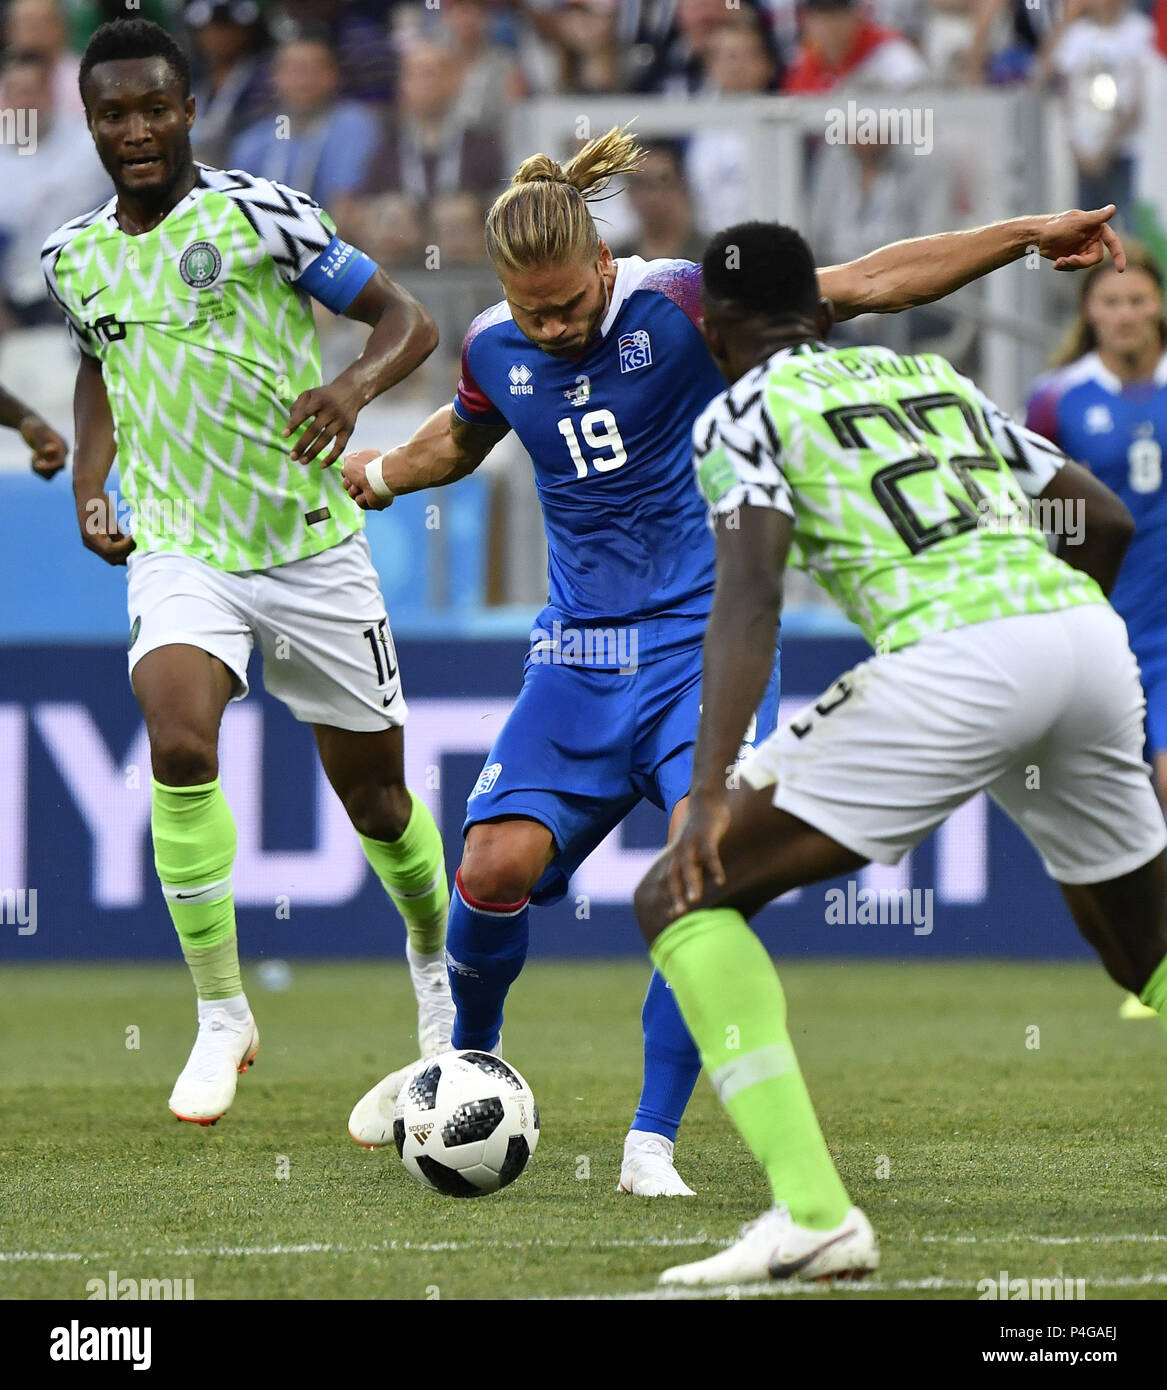 Volgograd, Russia. 22nd June, 2018. Rurik Gislason (C) of Iceland competes during the 2018 FIFA World Cup Group D match between Nigeria and Iceland in Volgograd, Russia, June 22, 2018. Nigeria won 2-0. Credit: He Canling/Xinhua/Alamy Live News Stock Photo